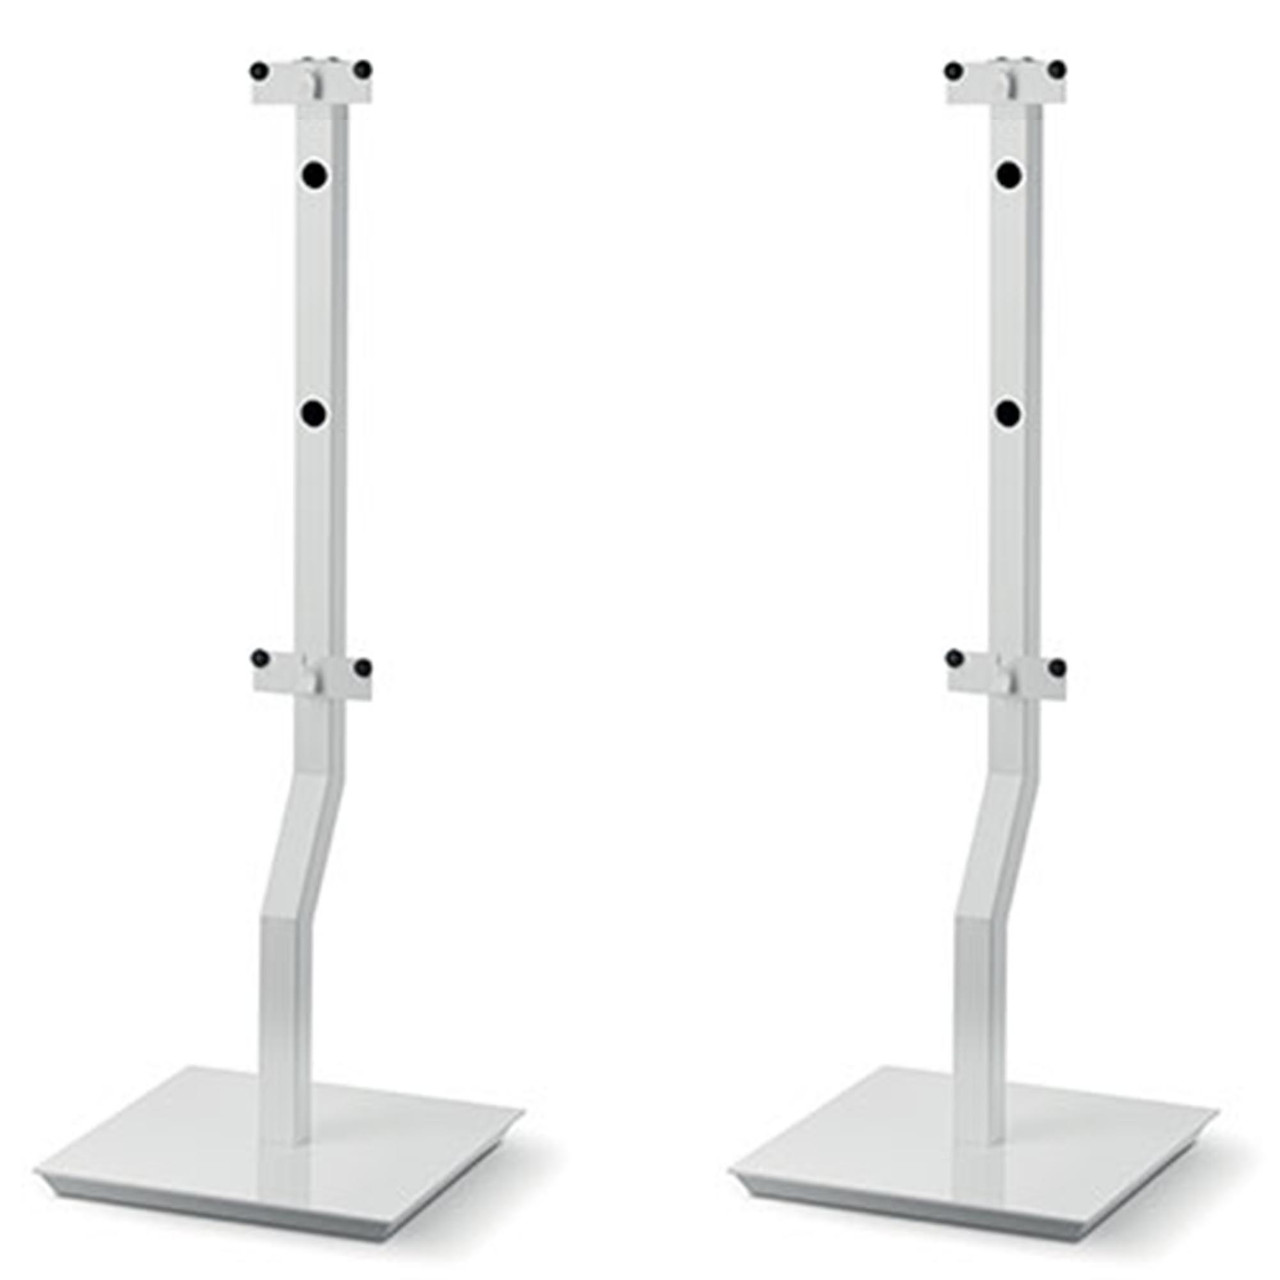 Focal ON WALL 300 Stand - White (Pair) - Creative Audio